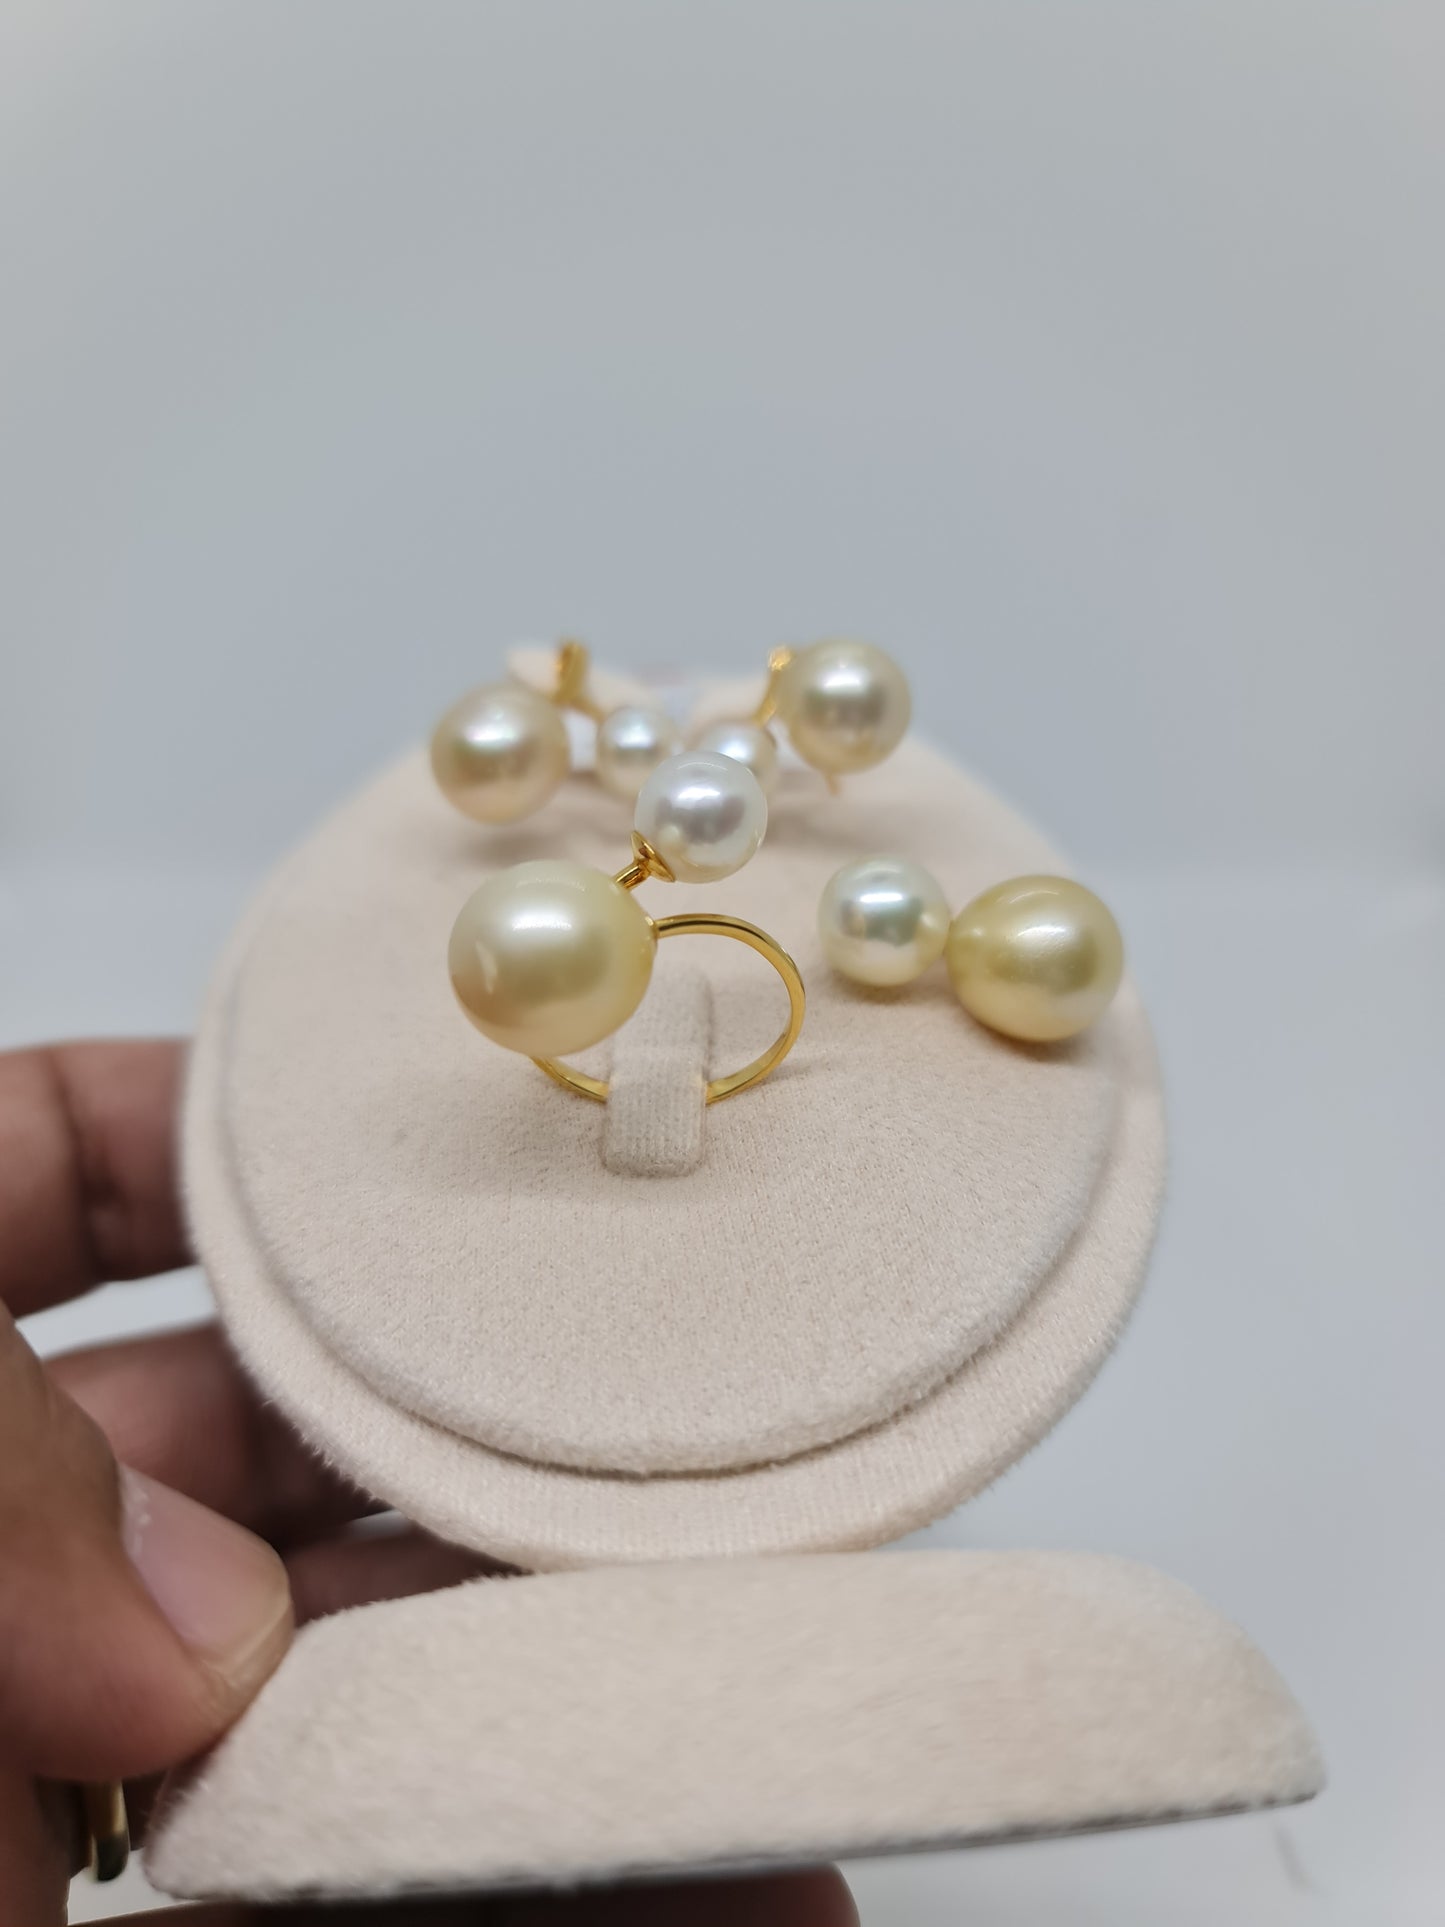 8mm to 12mm White & Champagne South Sea Pearls Set in 14K Gold